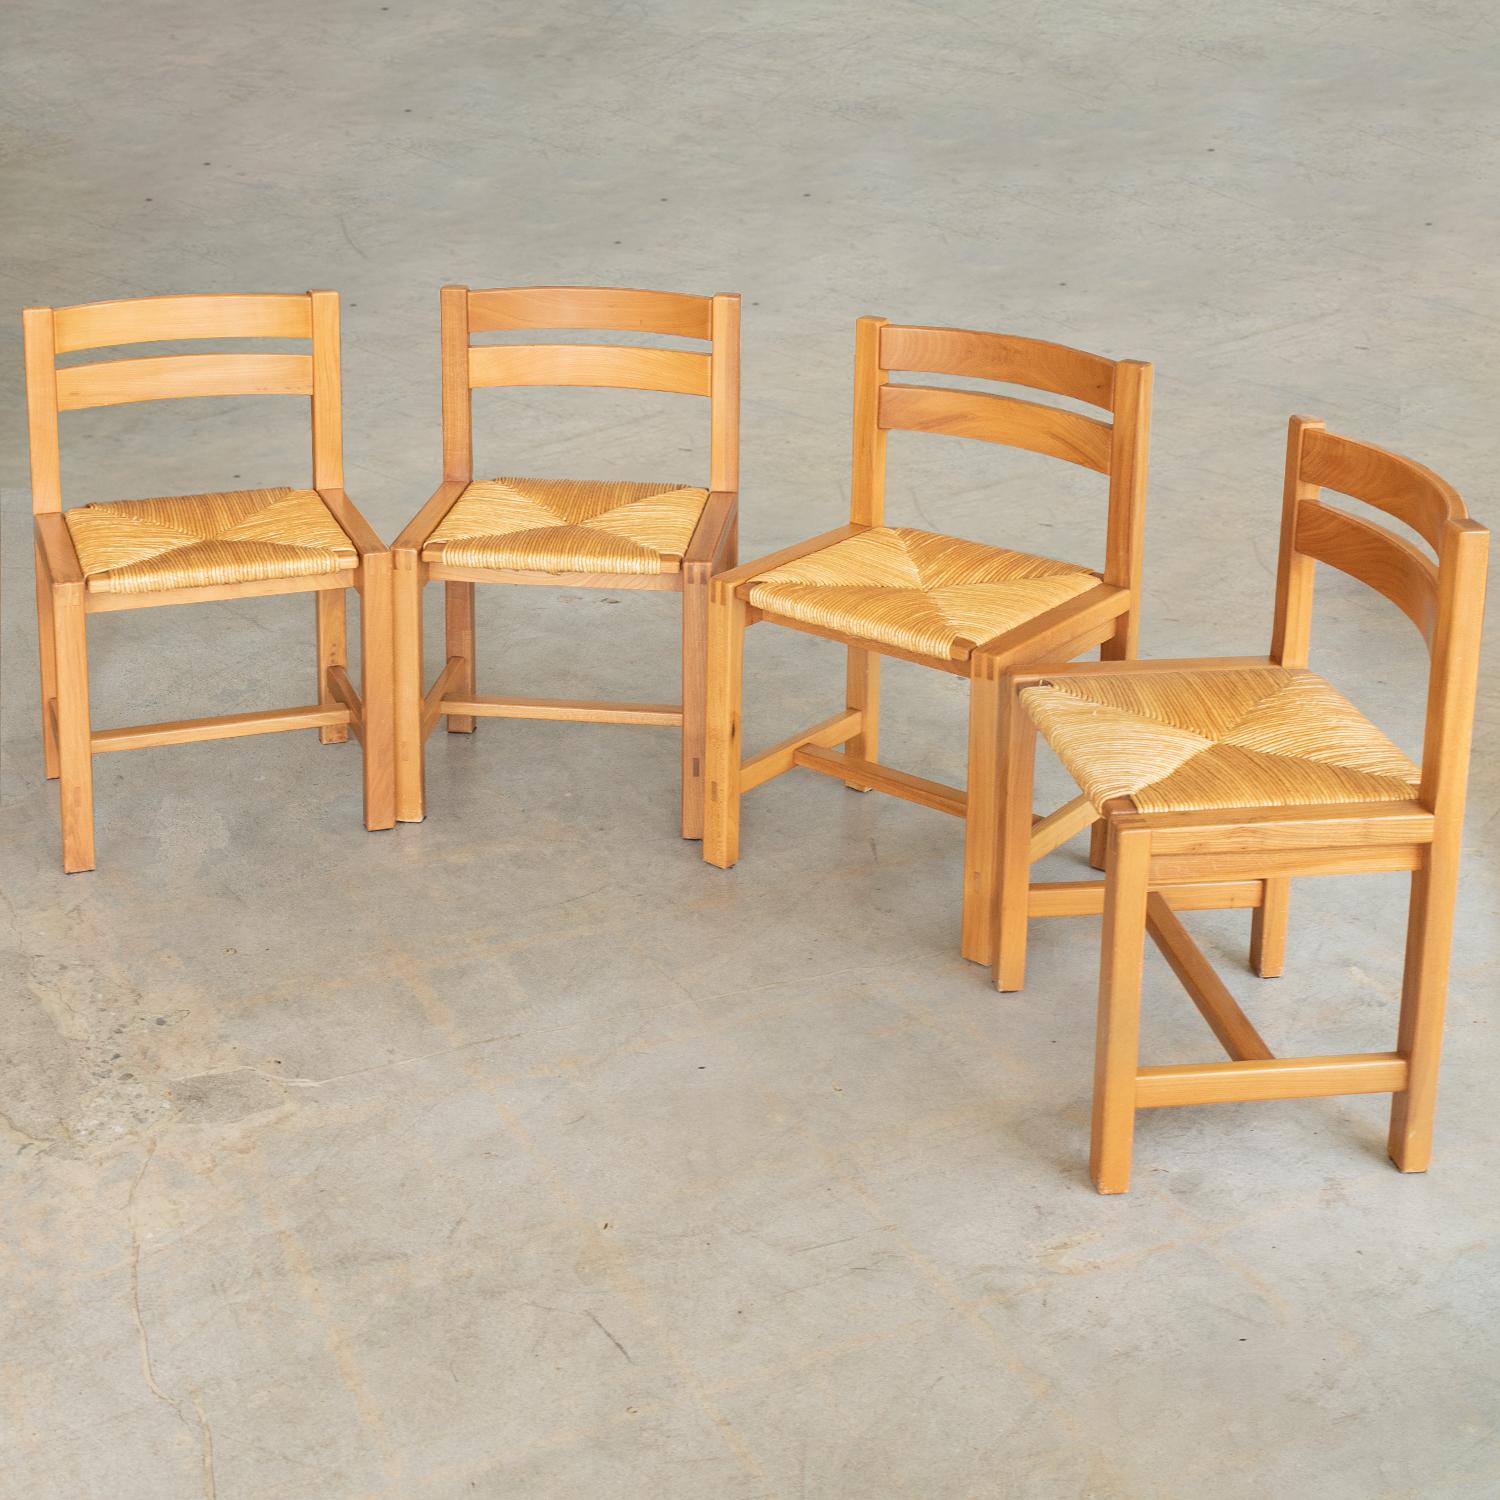 Incredible set of four elm and woven chairs by Maison Regain from France 1950s. Solid legs with beautiful curved wood backs. Original woven rush seats in great vintage condition. Wood is in vintage condition with some imperfections and age markings